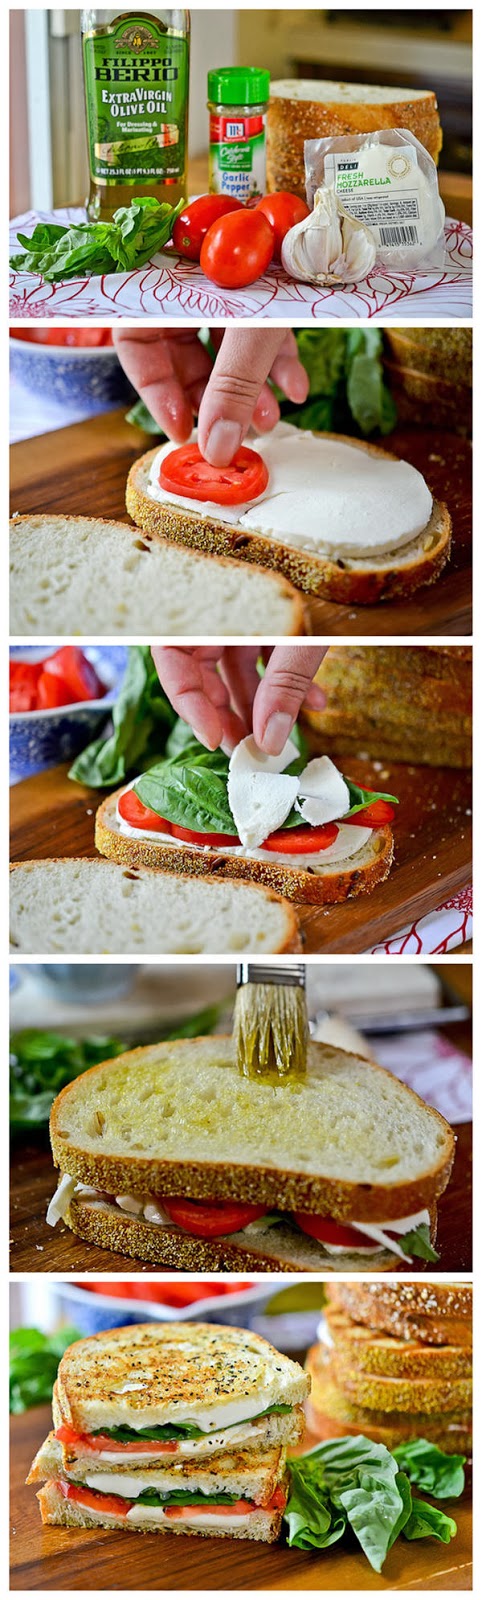 20. Grilled Margherita Sandwiches